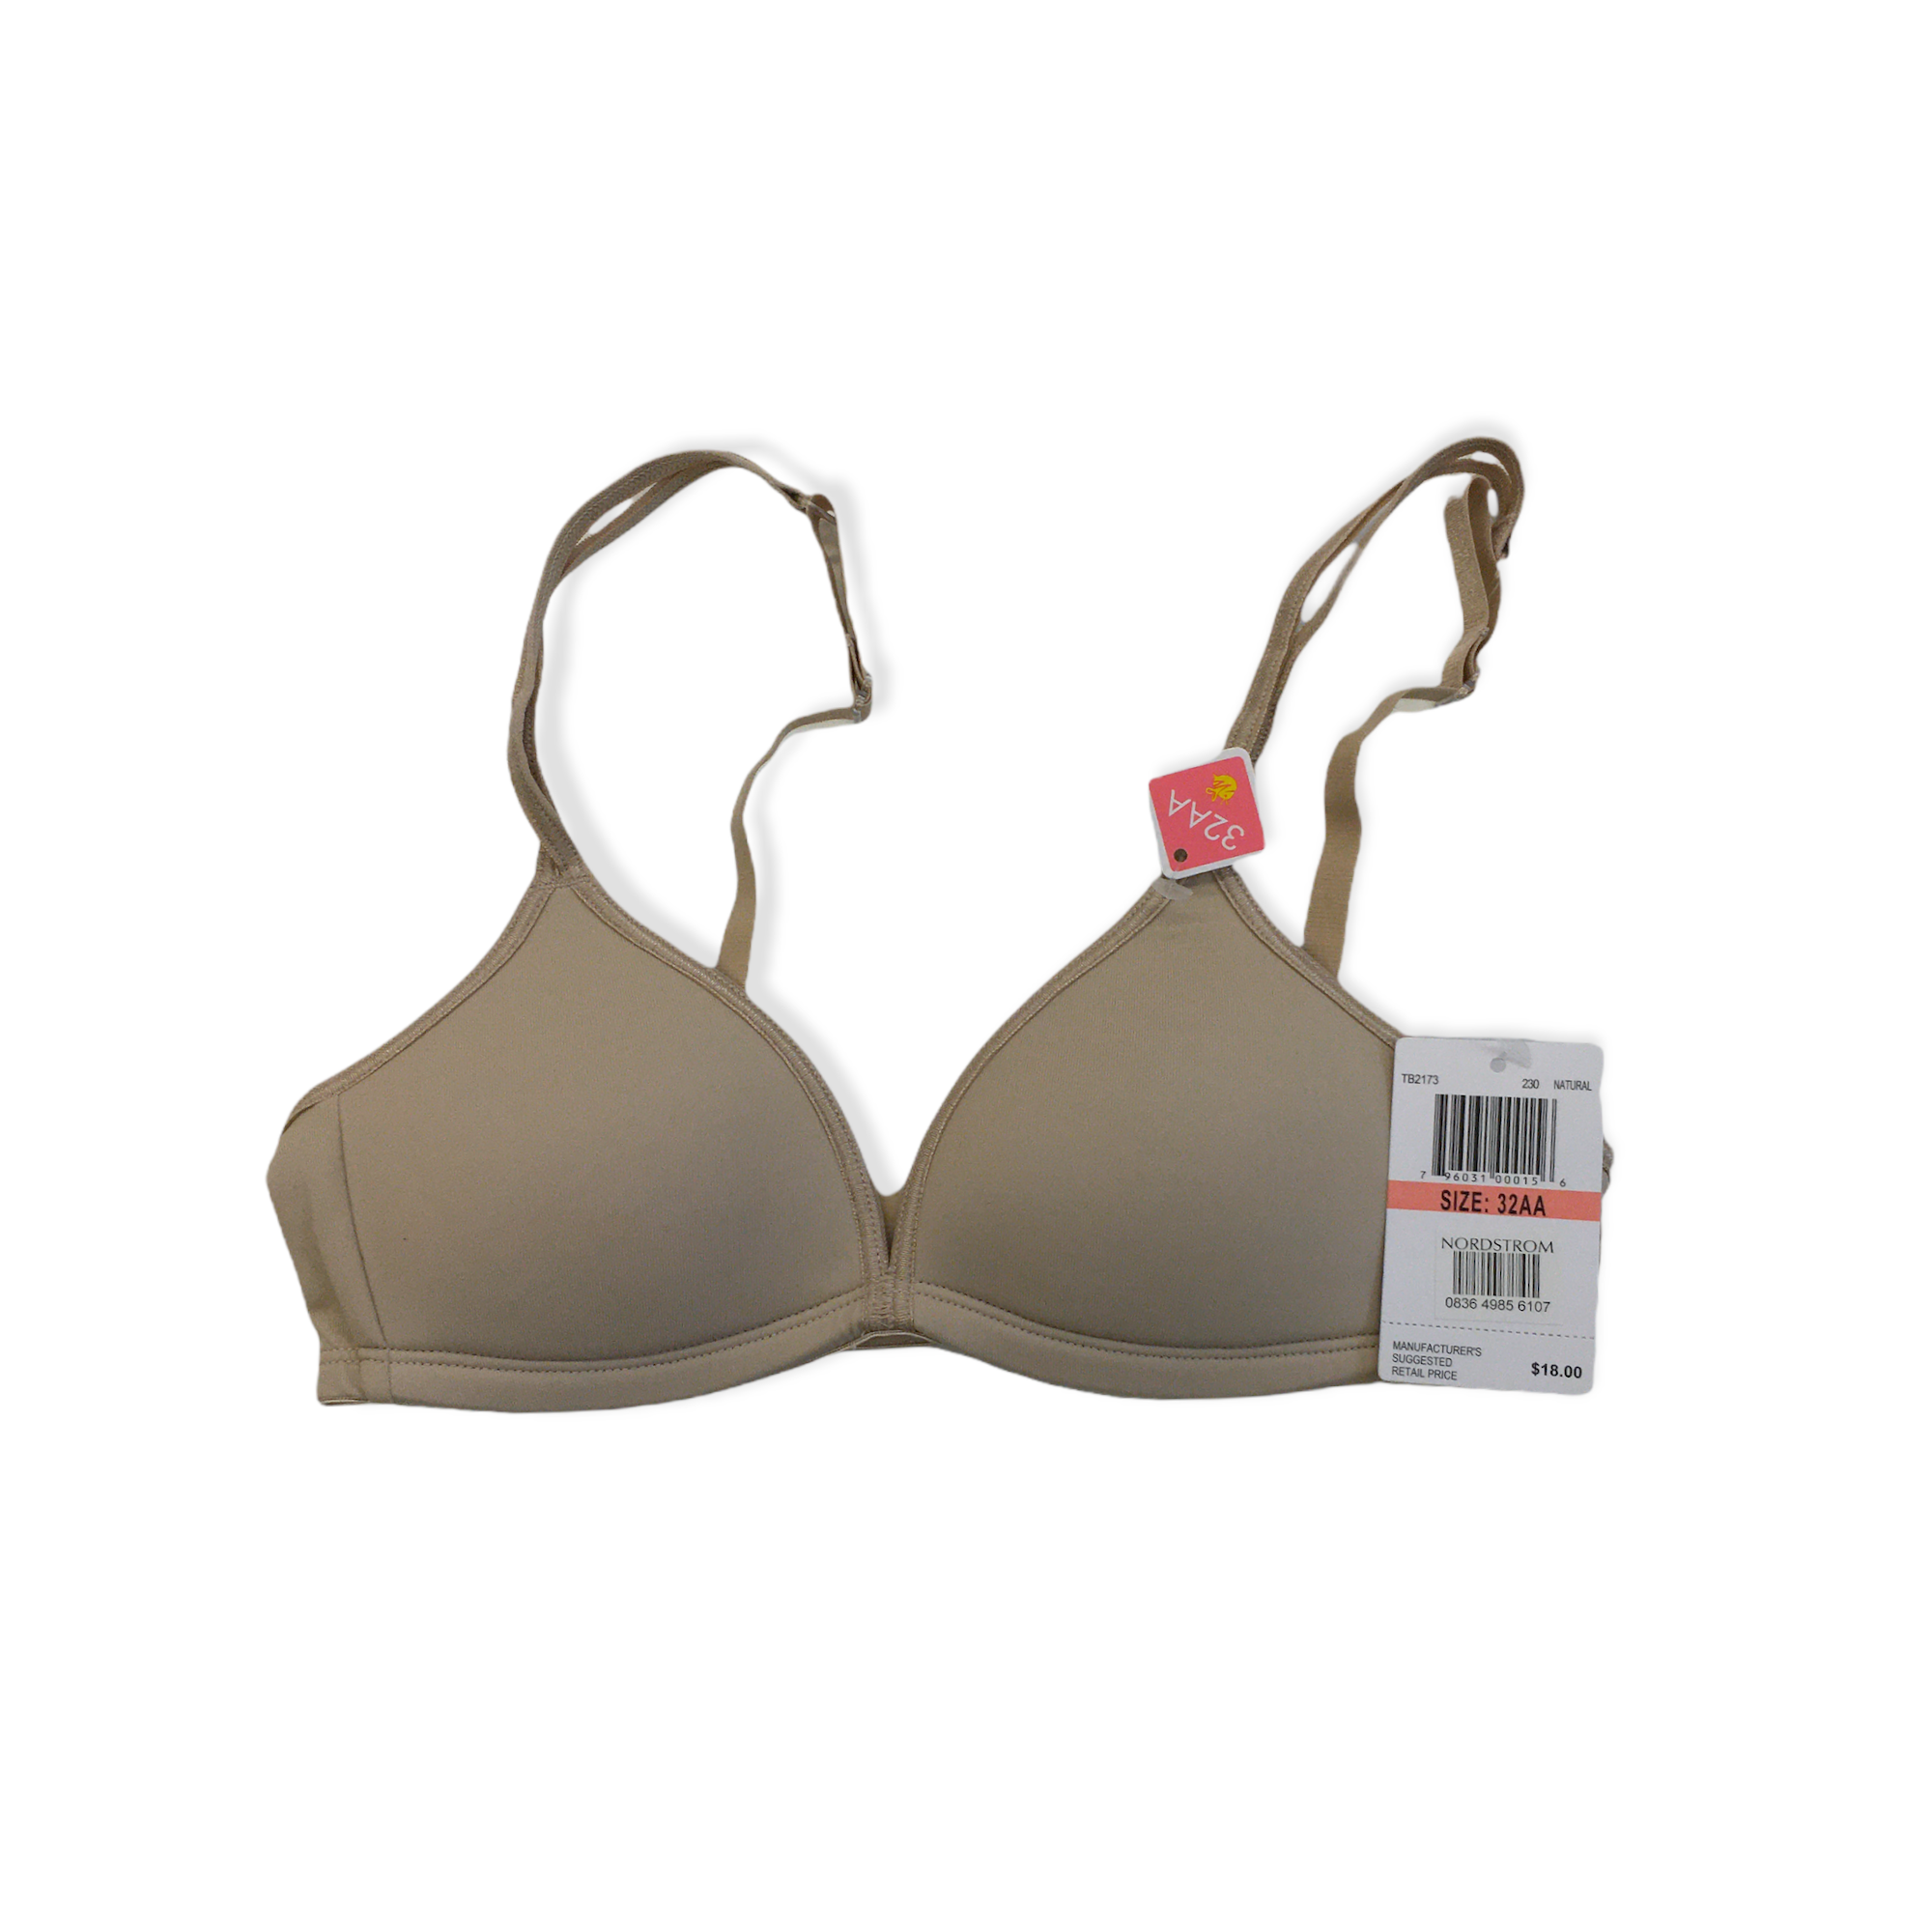 Miss Classy - NEW ARRIVALS Primark pack of 3 bras @ Miss